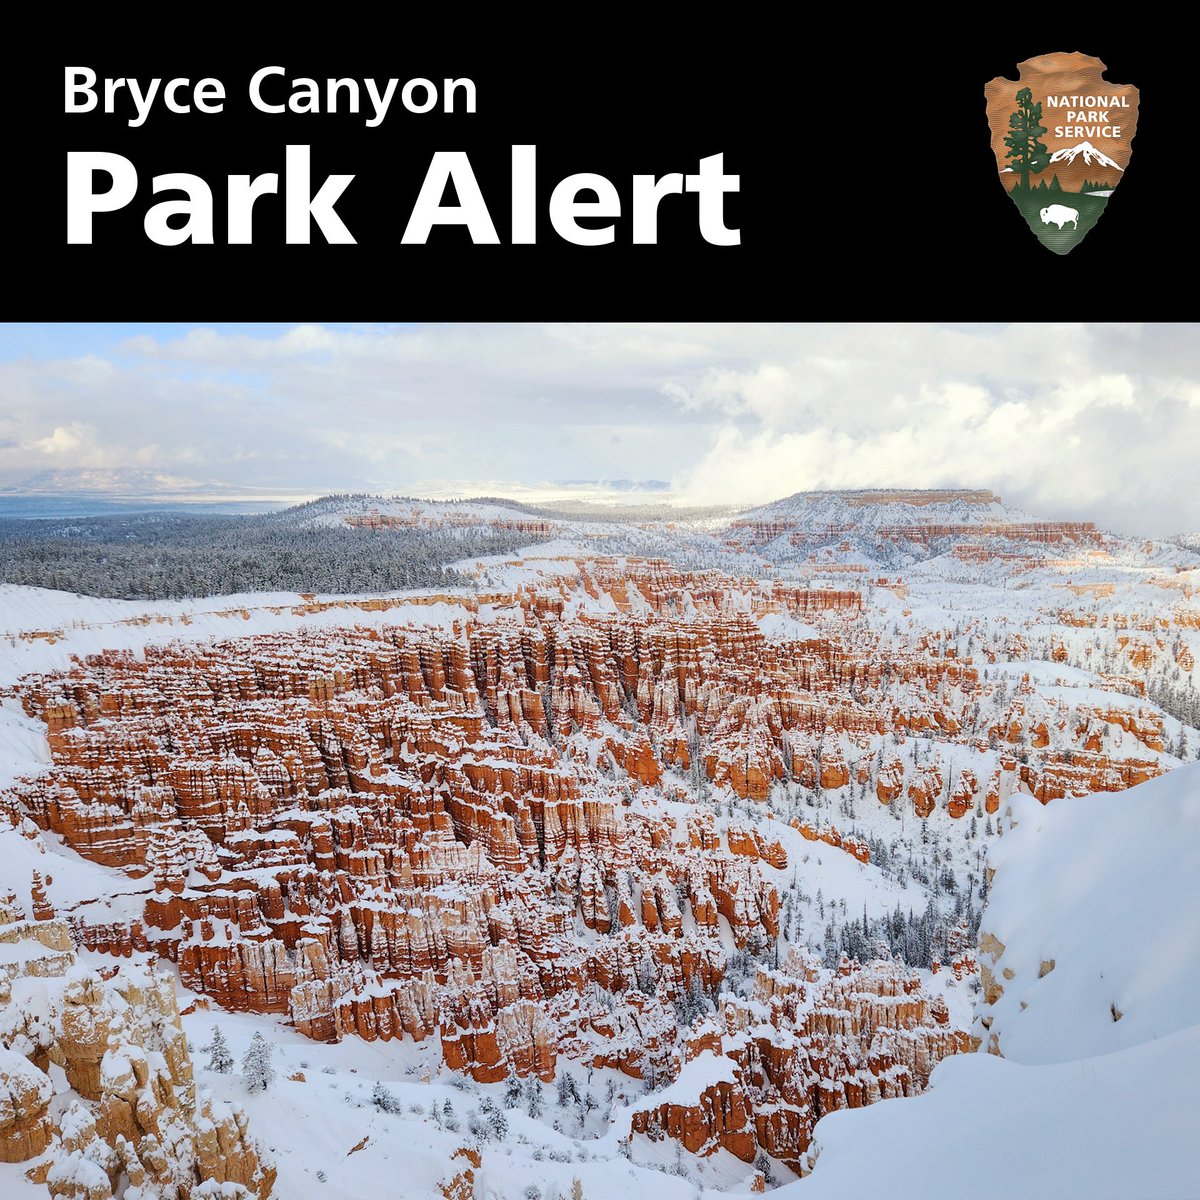 ✅ The Main Road is now open to Mile 3 of 18, allowing vehicle access to viewpoints within the Bryce Amphitheater (pictured). Road conditions are partly clear with areas of compacted snow and ice. Trail surfaces are compacted snow and ice. Please travel cautiously.